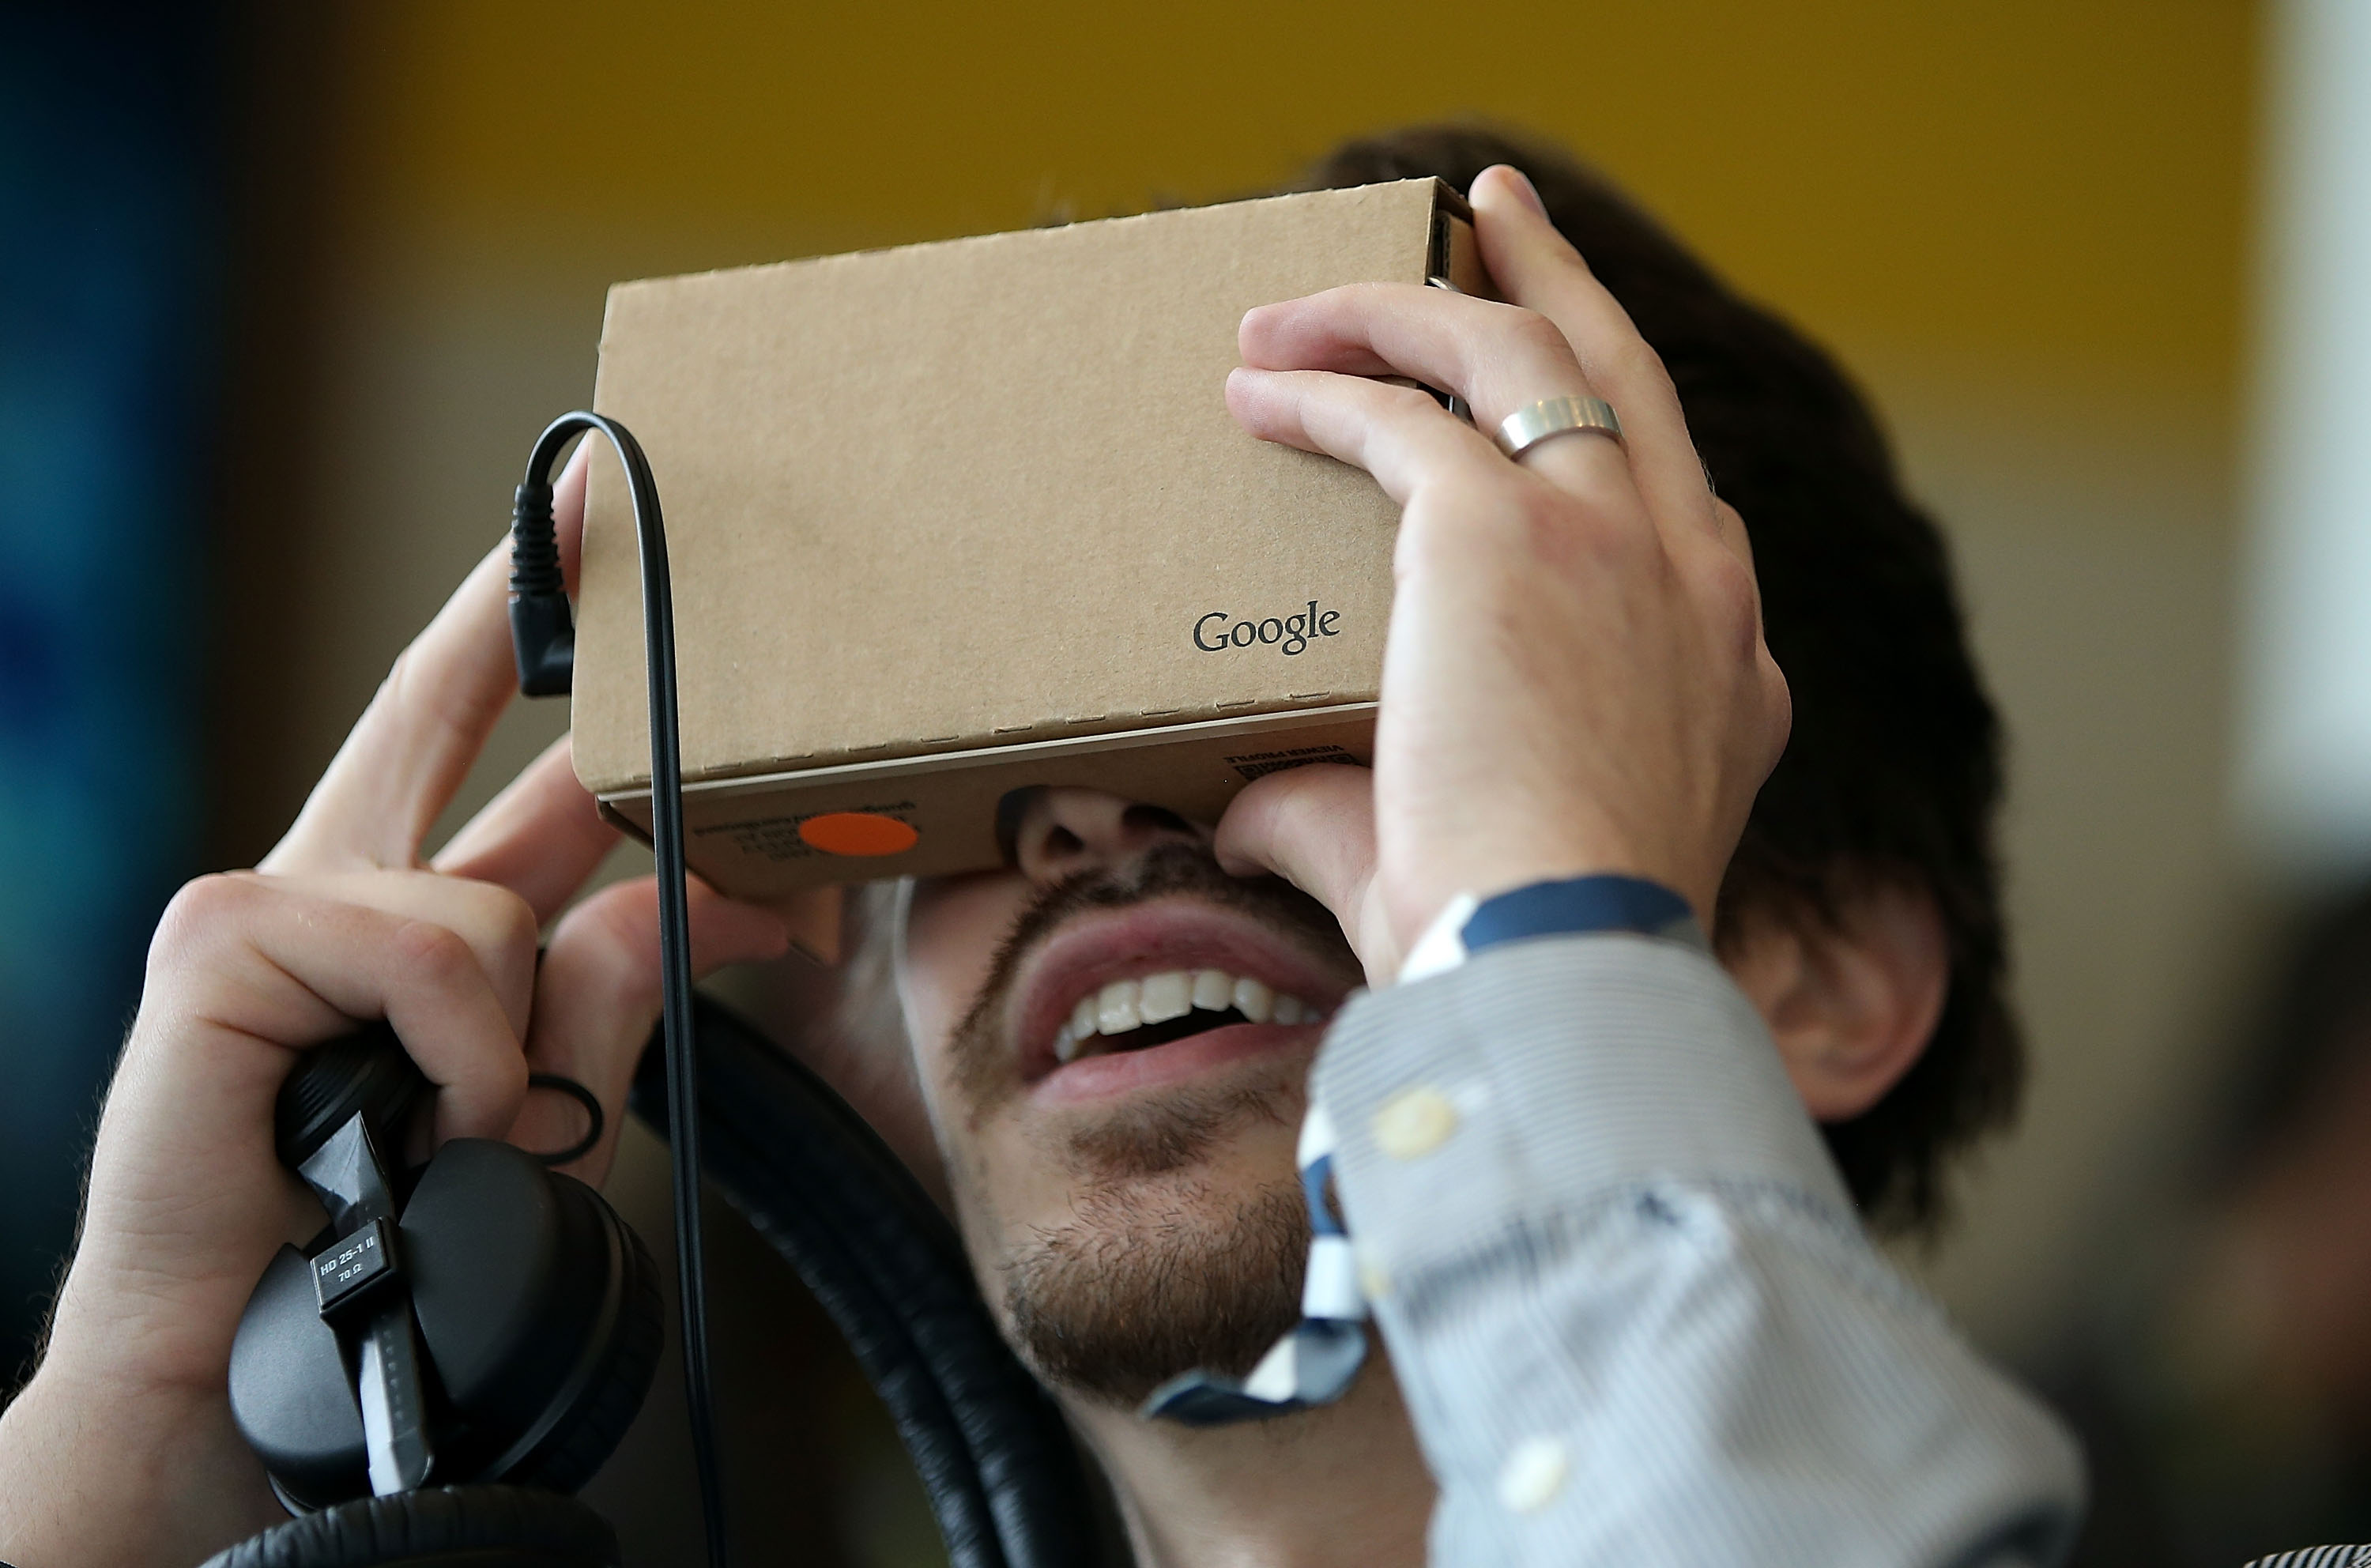 An attendee inspects Google Cardboard during the 2015 Google I/O conference on May 28, 2015 in San Francisco, Calif. (Justin Sullivan&mdash;Getty Images)